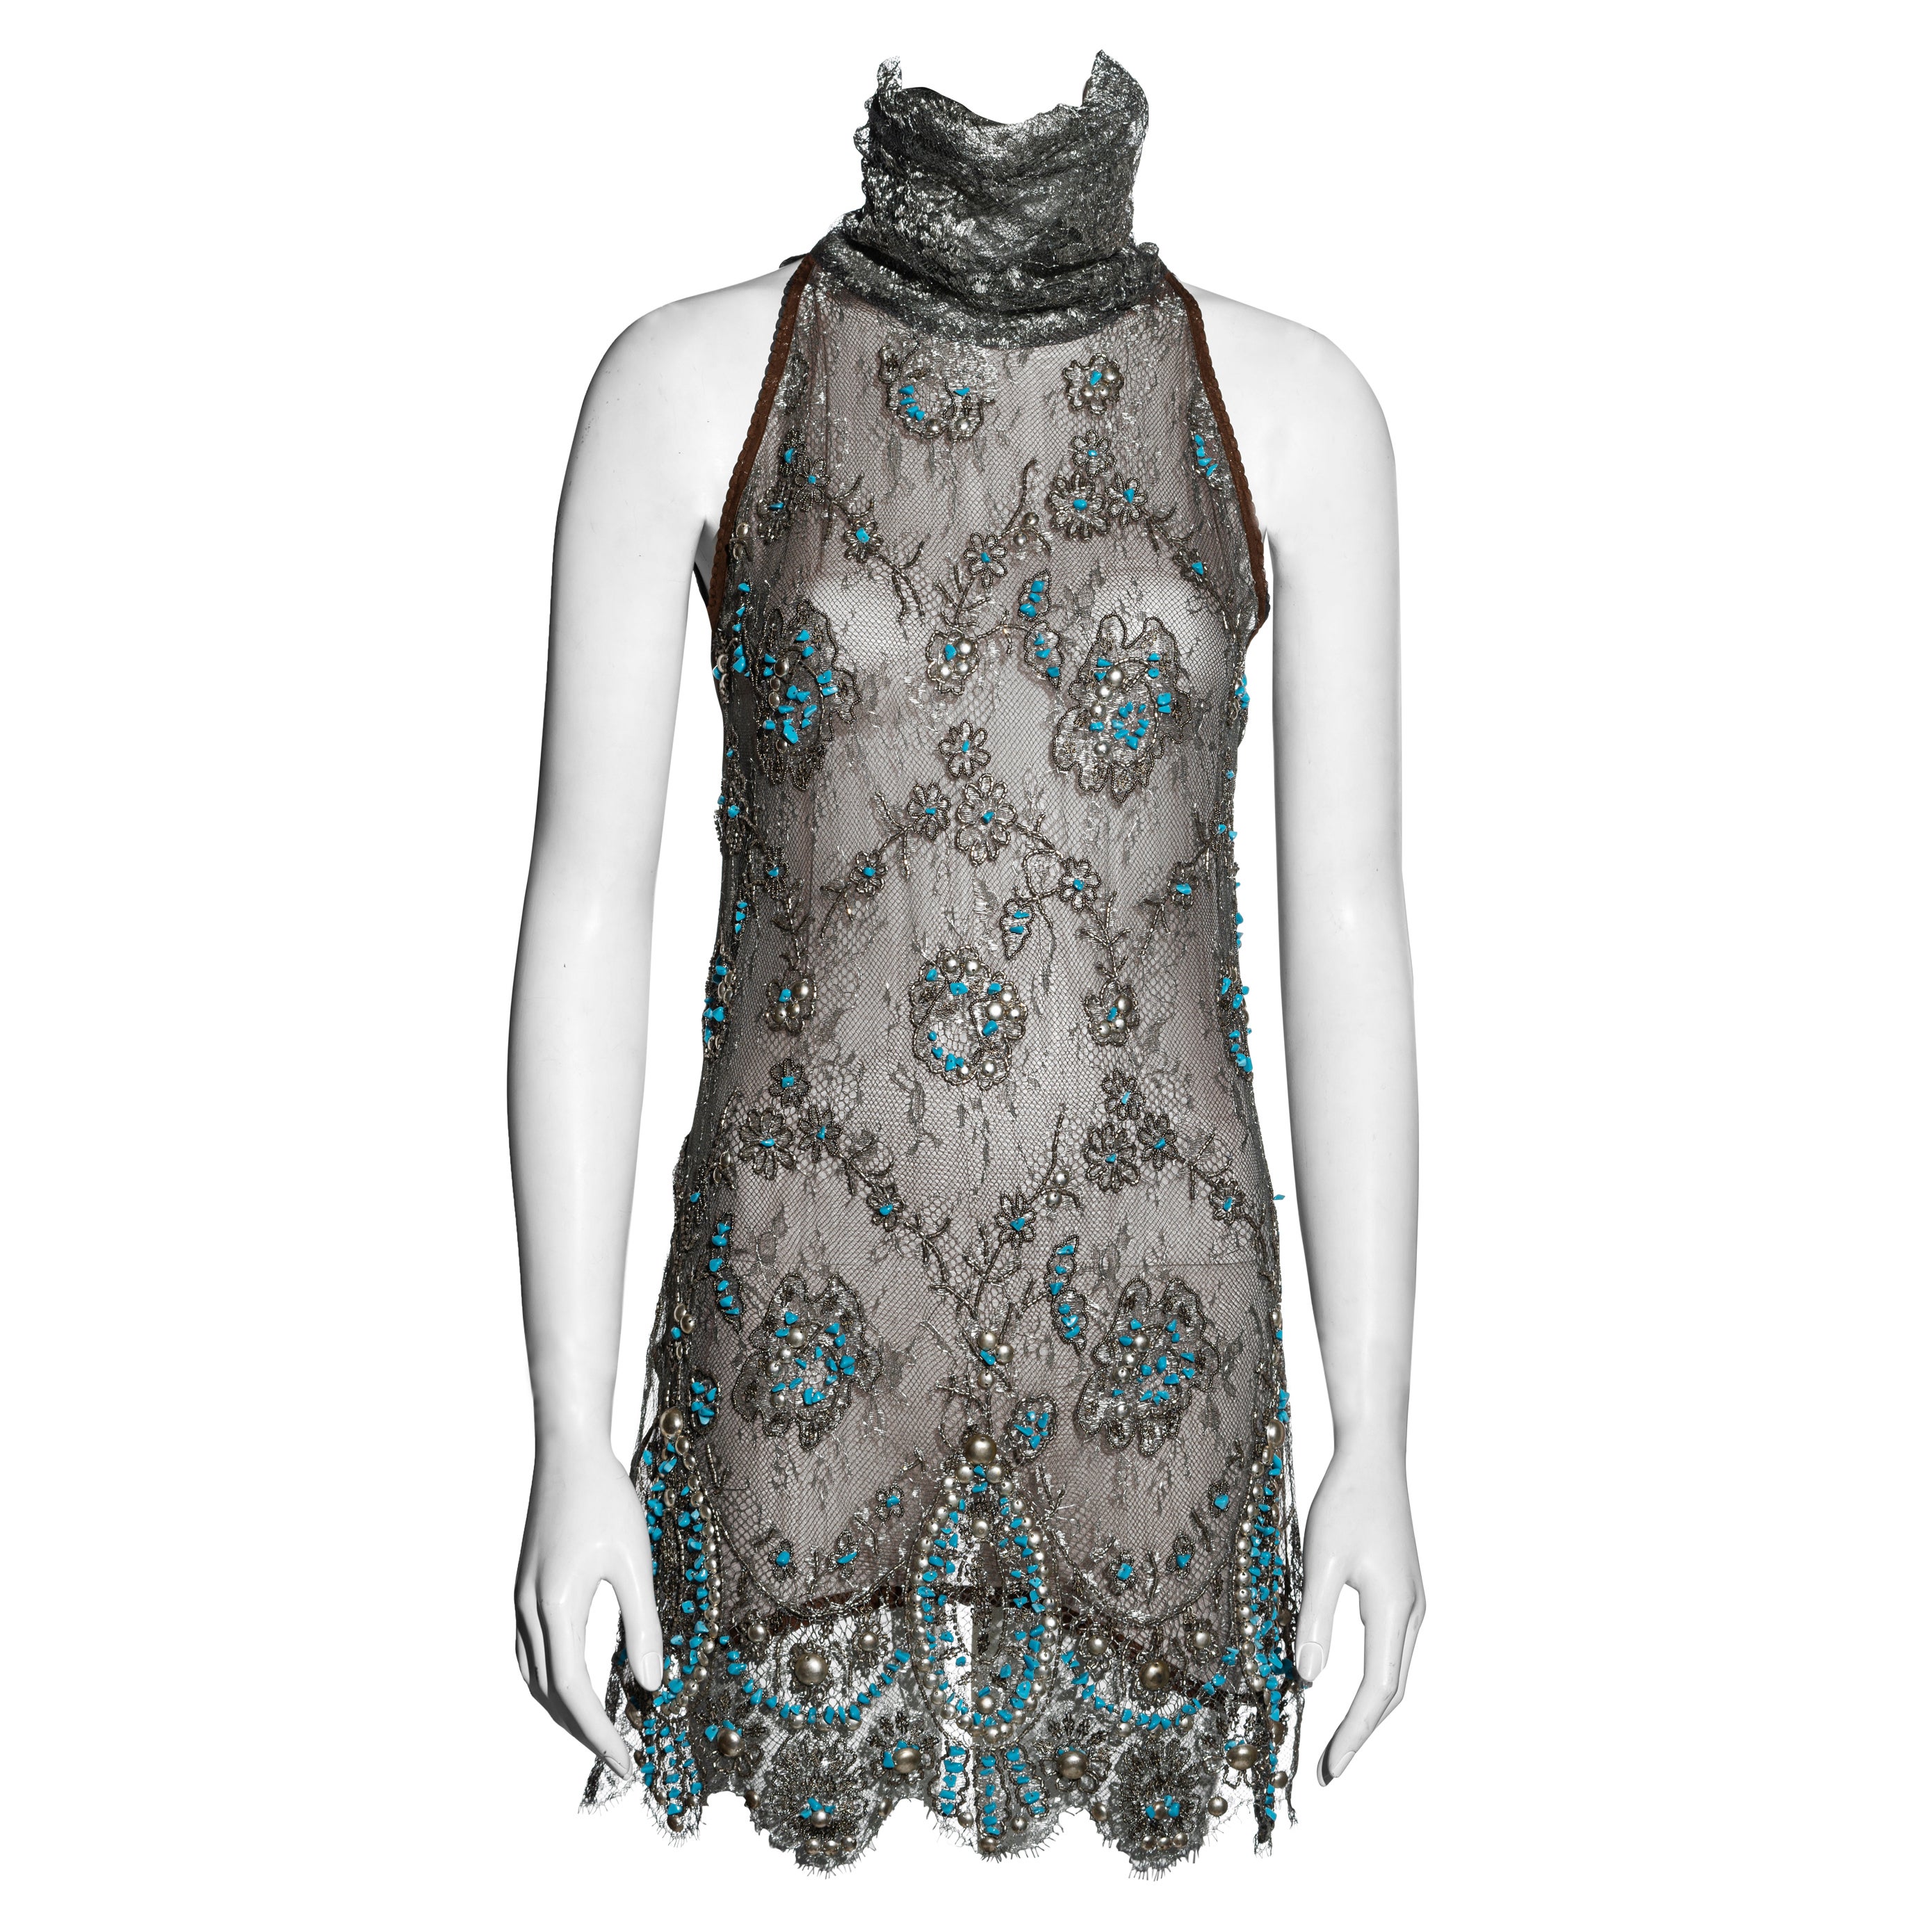 Gianfranco Ferre silver lamé lace embellished mini dress, ss 2006 For Sale